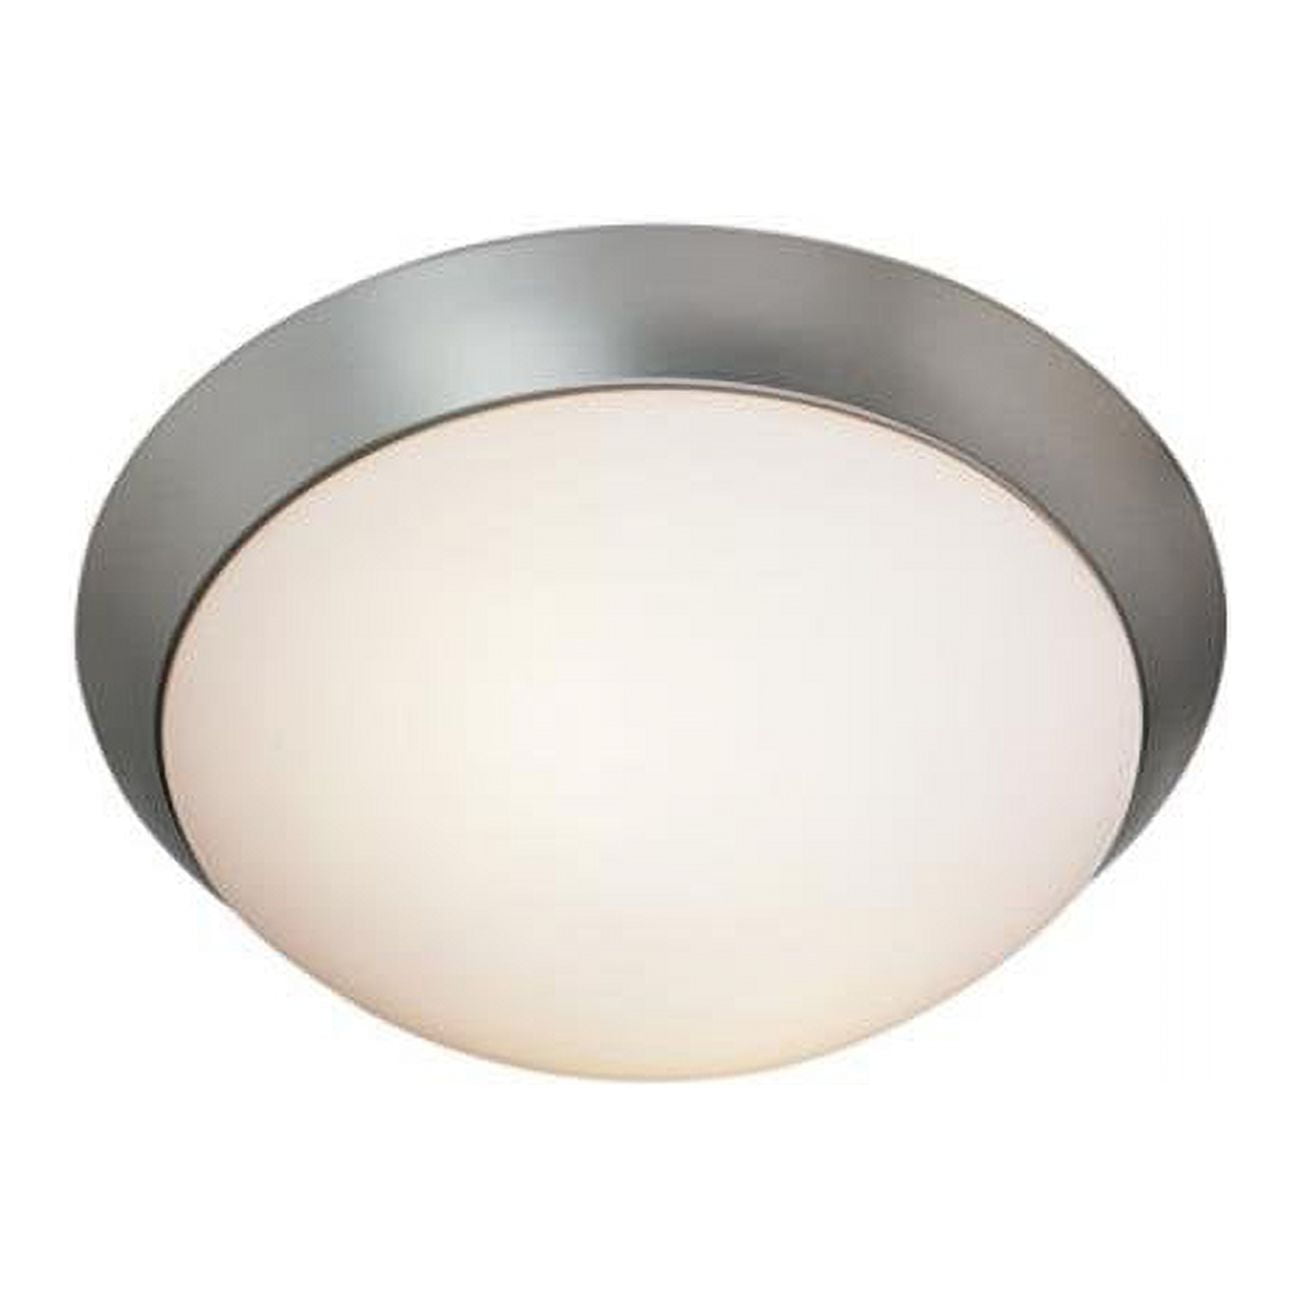 Picture of Access Lighting 20624GU-BS-OPL 11 in. Cobalt 2 Light Brushed Steel Flush Mount Ceiling Light in Fluorescent with Opal Glass